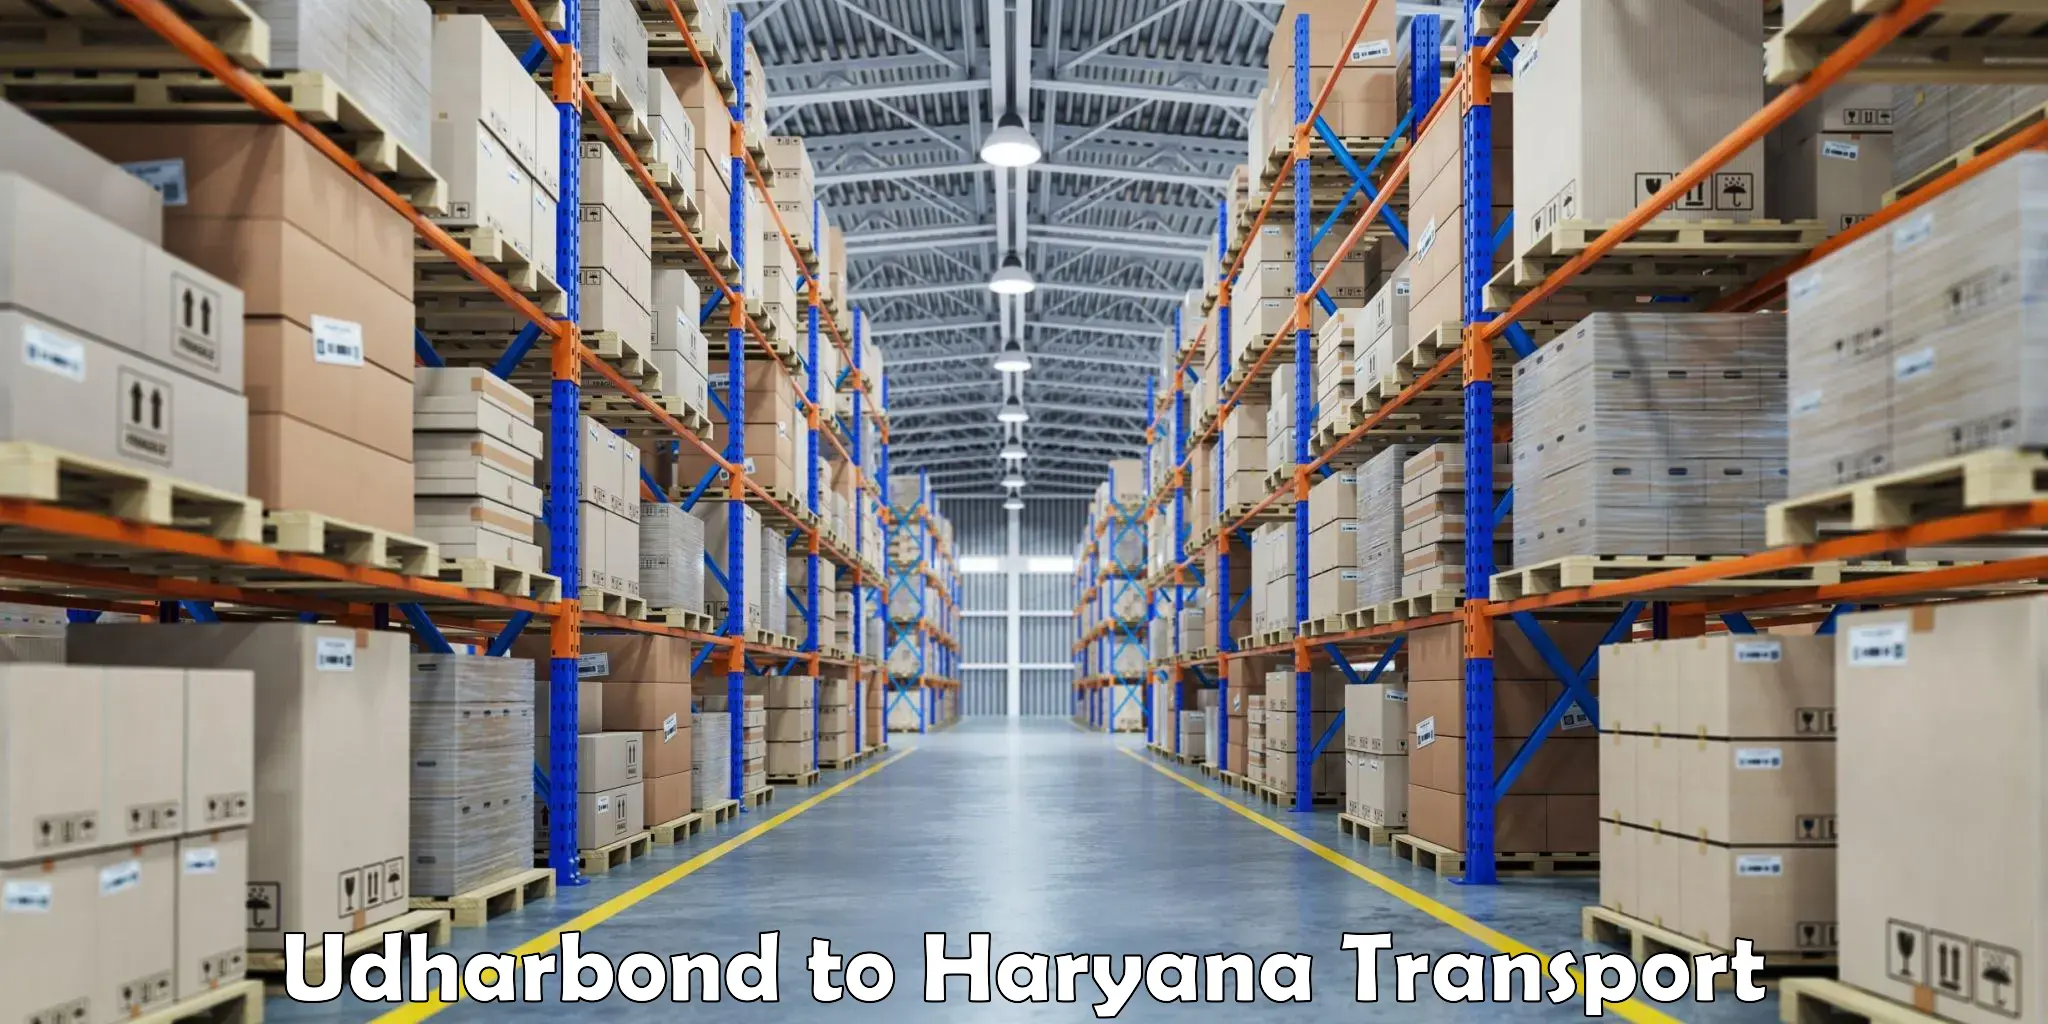 Transport in sharing Udharbond to Haryana